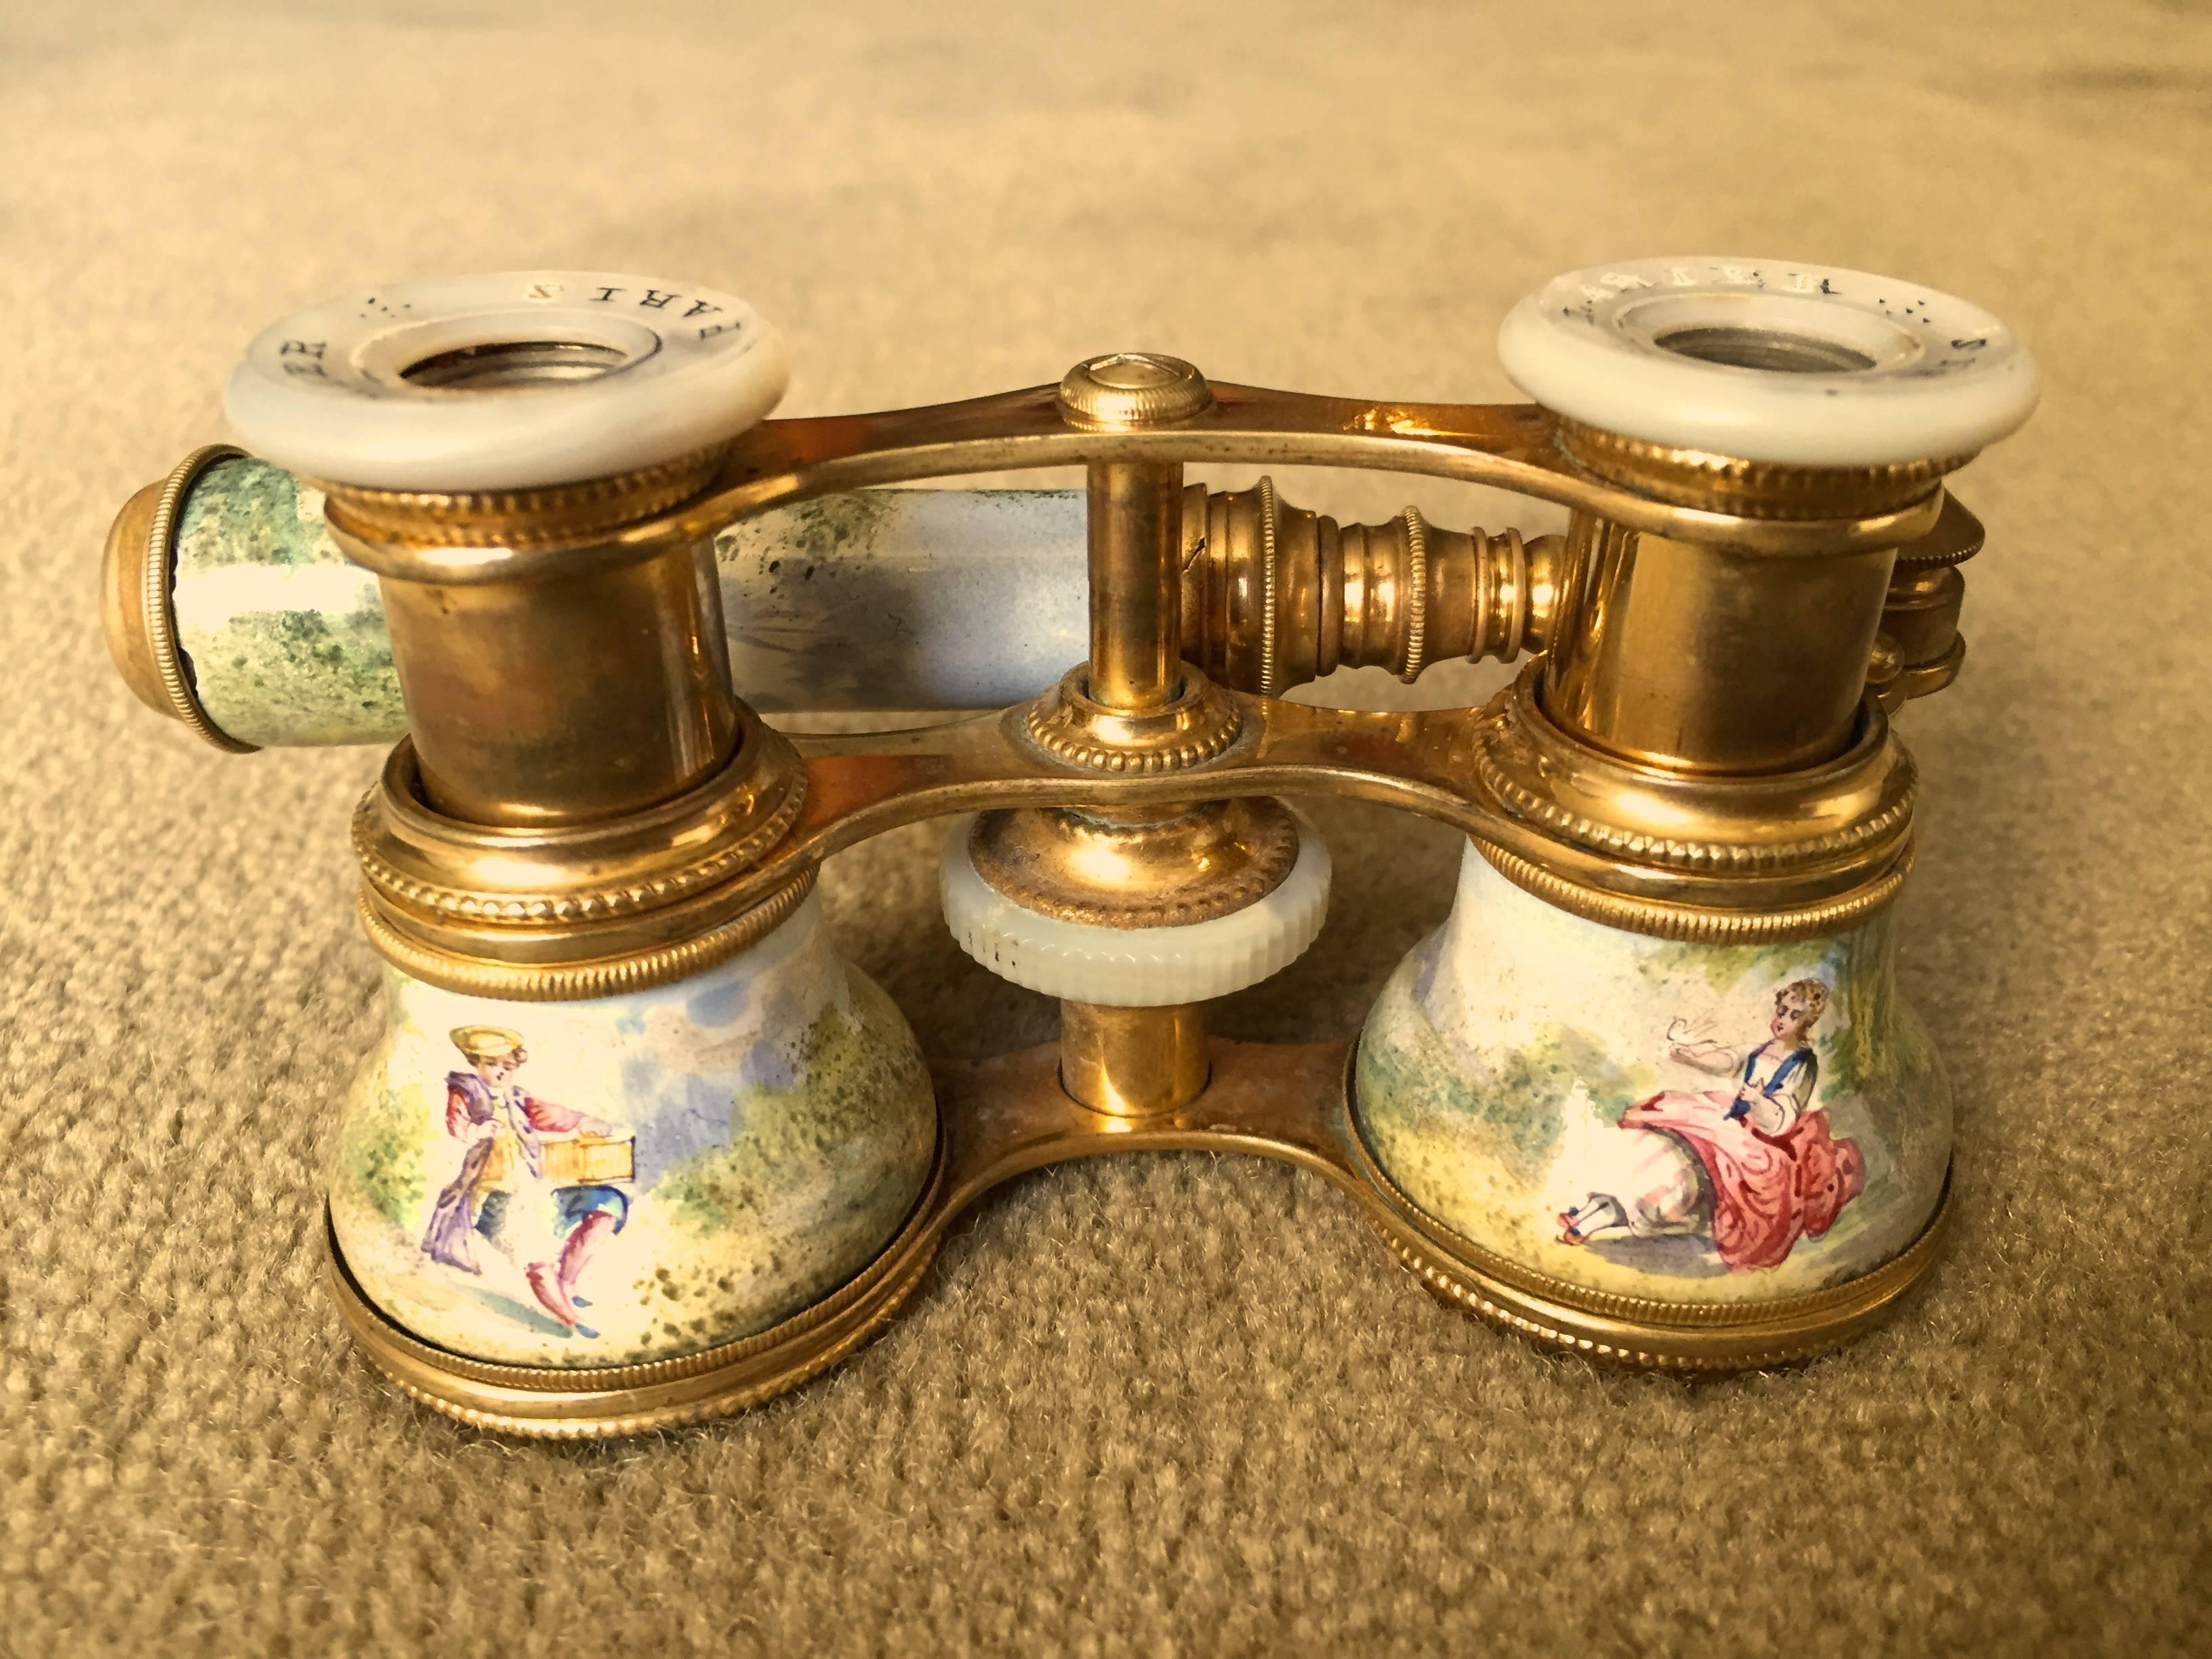 Gilt French Enamel Opera Glasses Courtship Scenes Hand-Painted, circa 1880, Paris For Sale